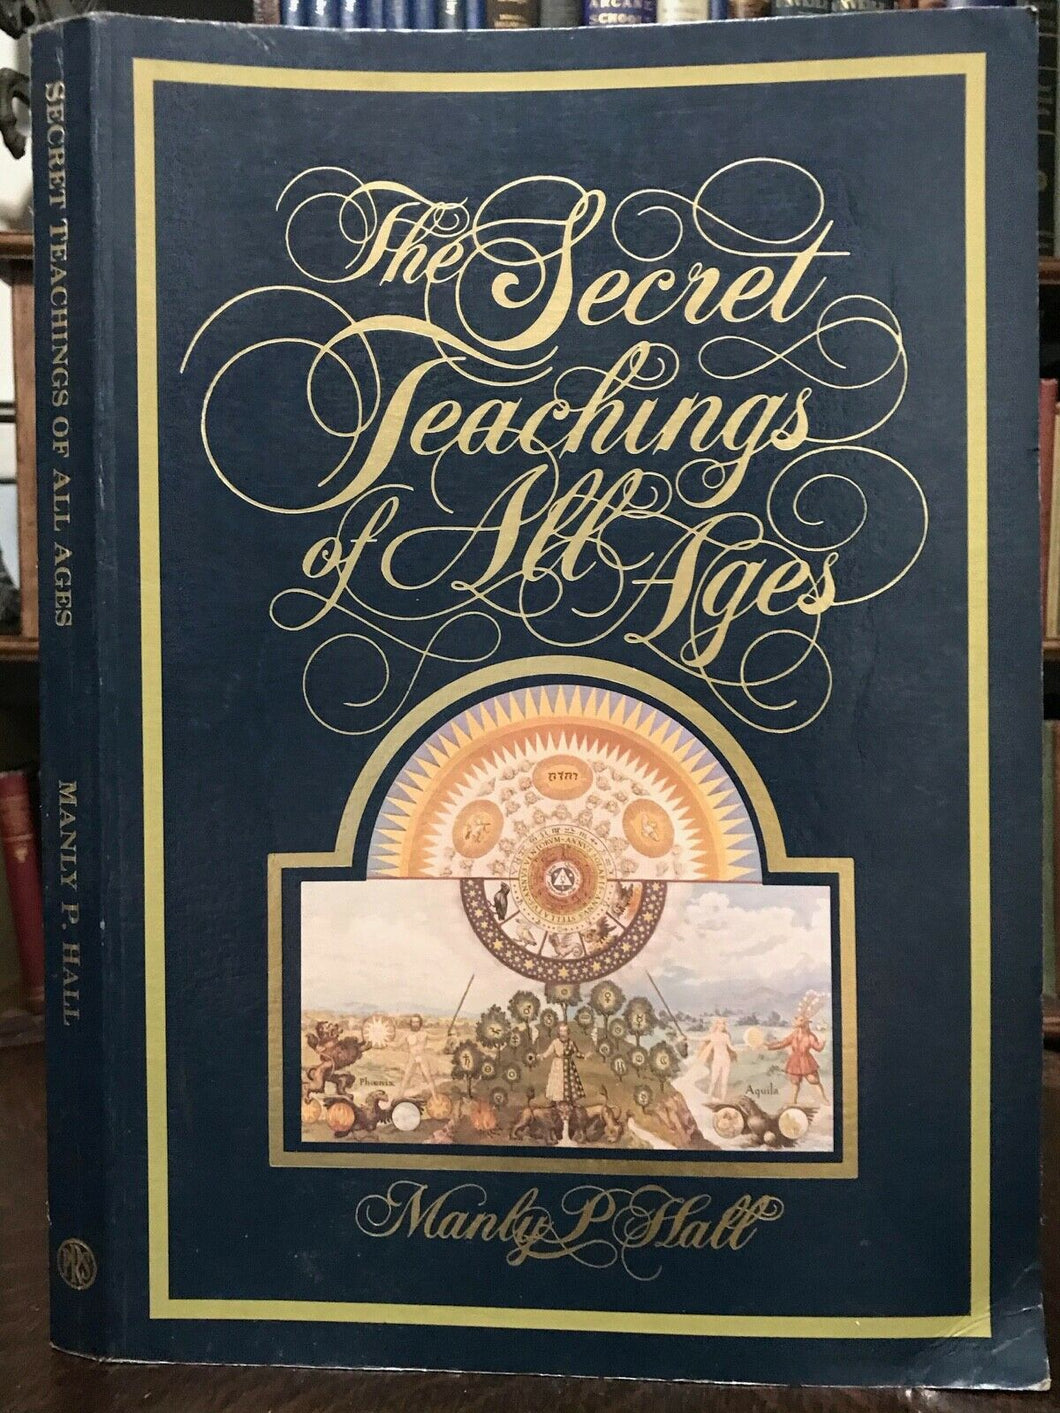 SECRET TEACHINGS OF ALL AGES - Manly Hall, 1989 MAGICK HERMETIC ALCHEMY MASONIC